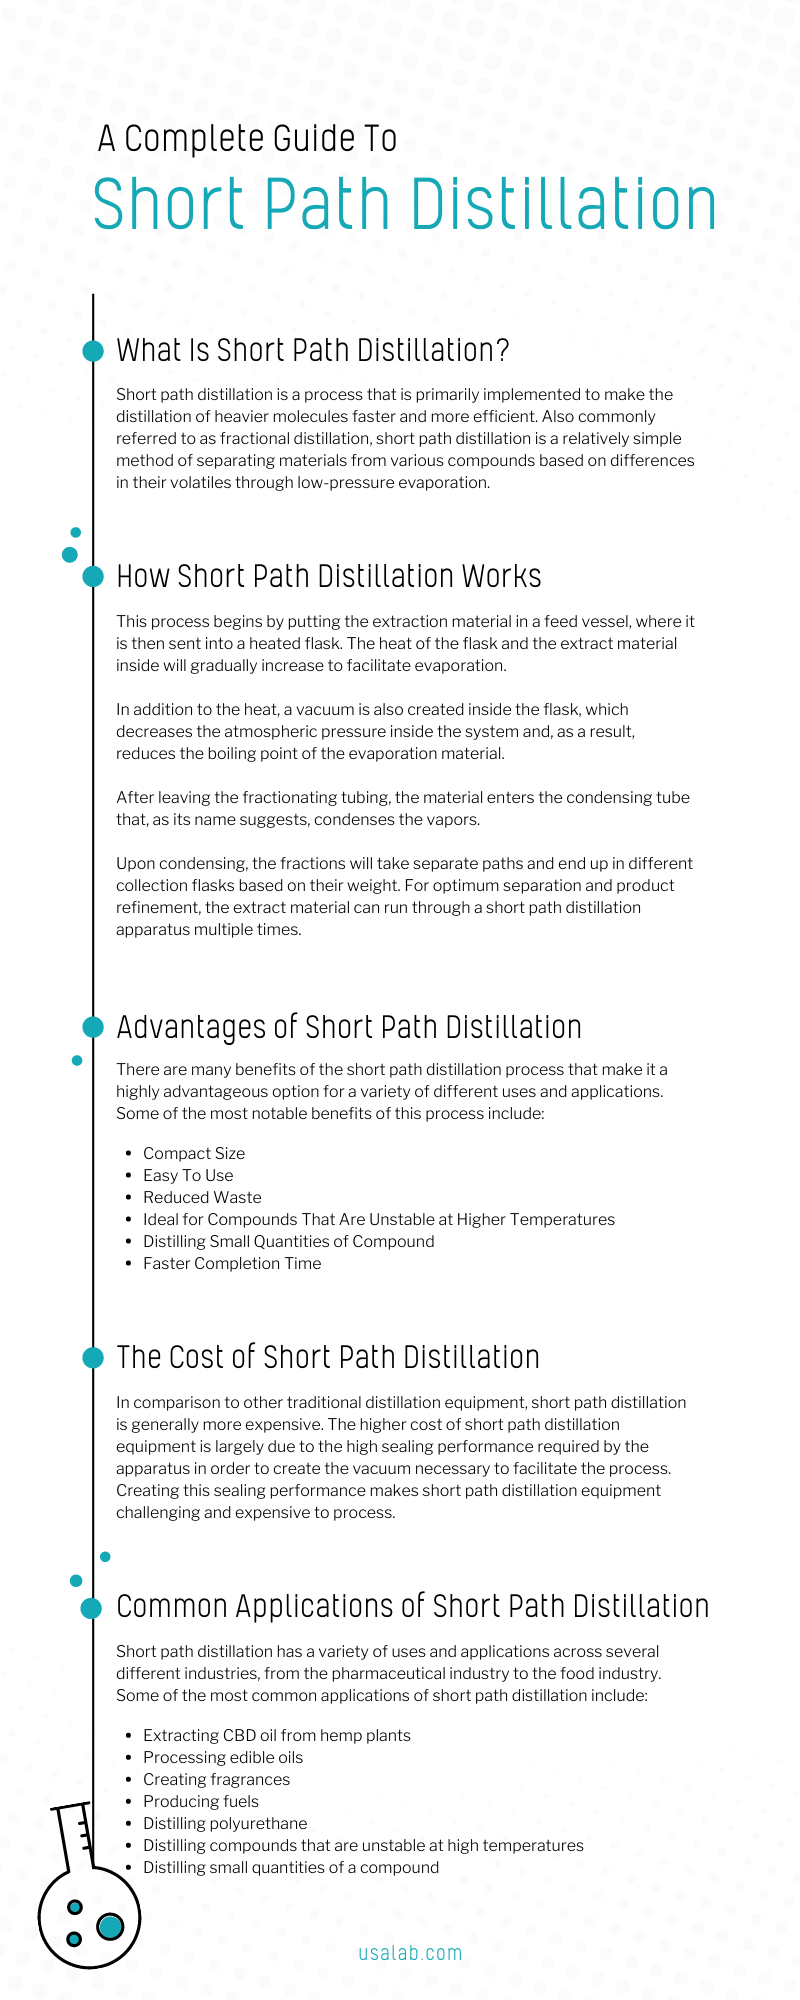 A Complete Guide To Short Path Distillation